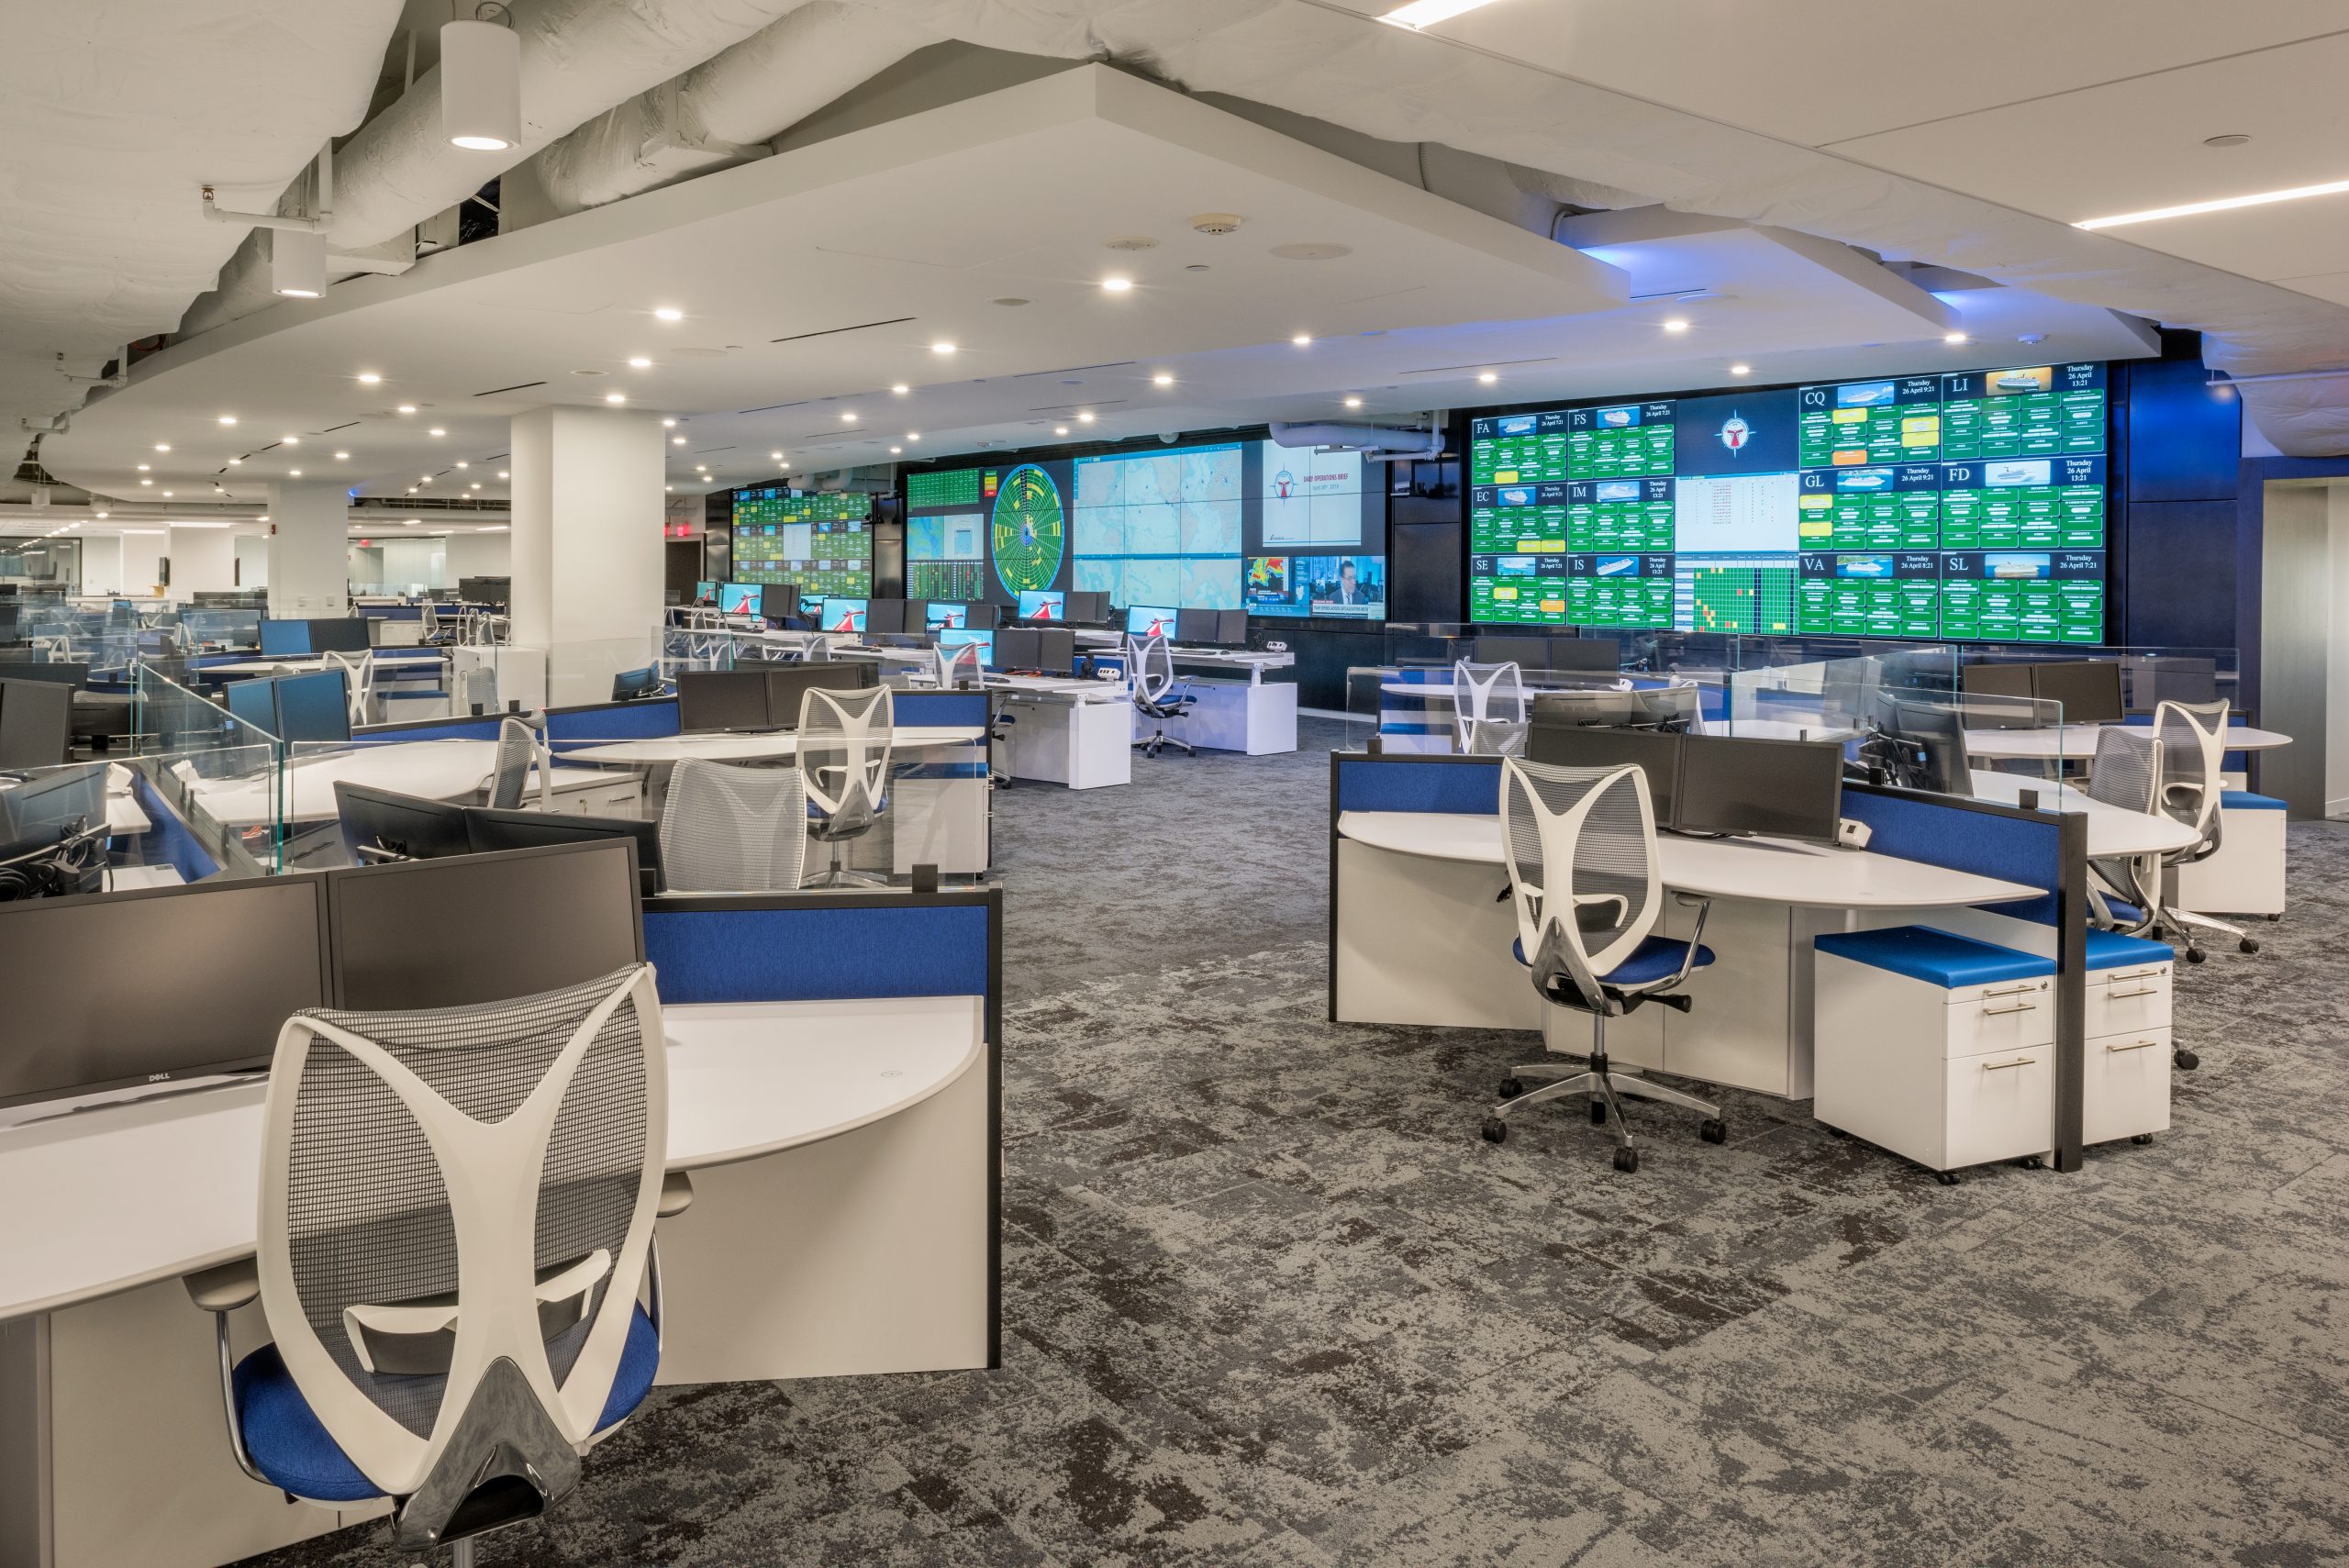 Fleet operations center for carnival cruise lines with large format video wall. 